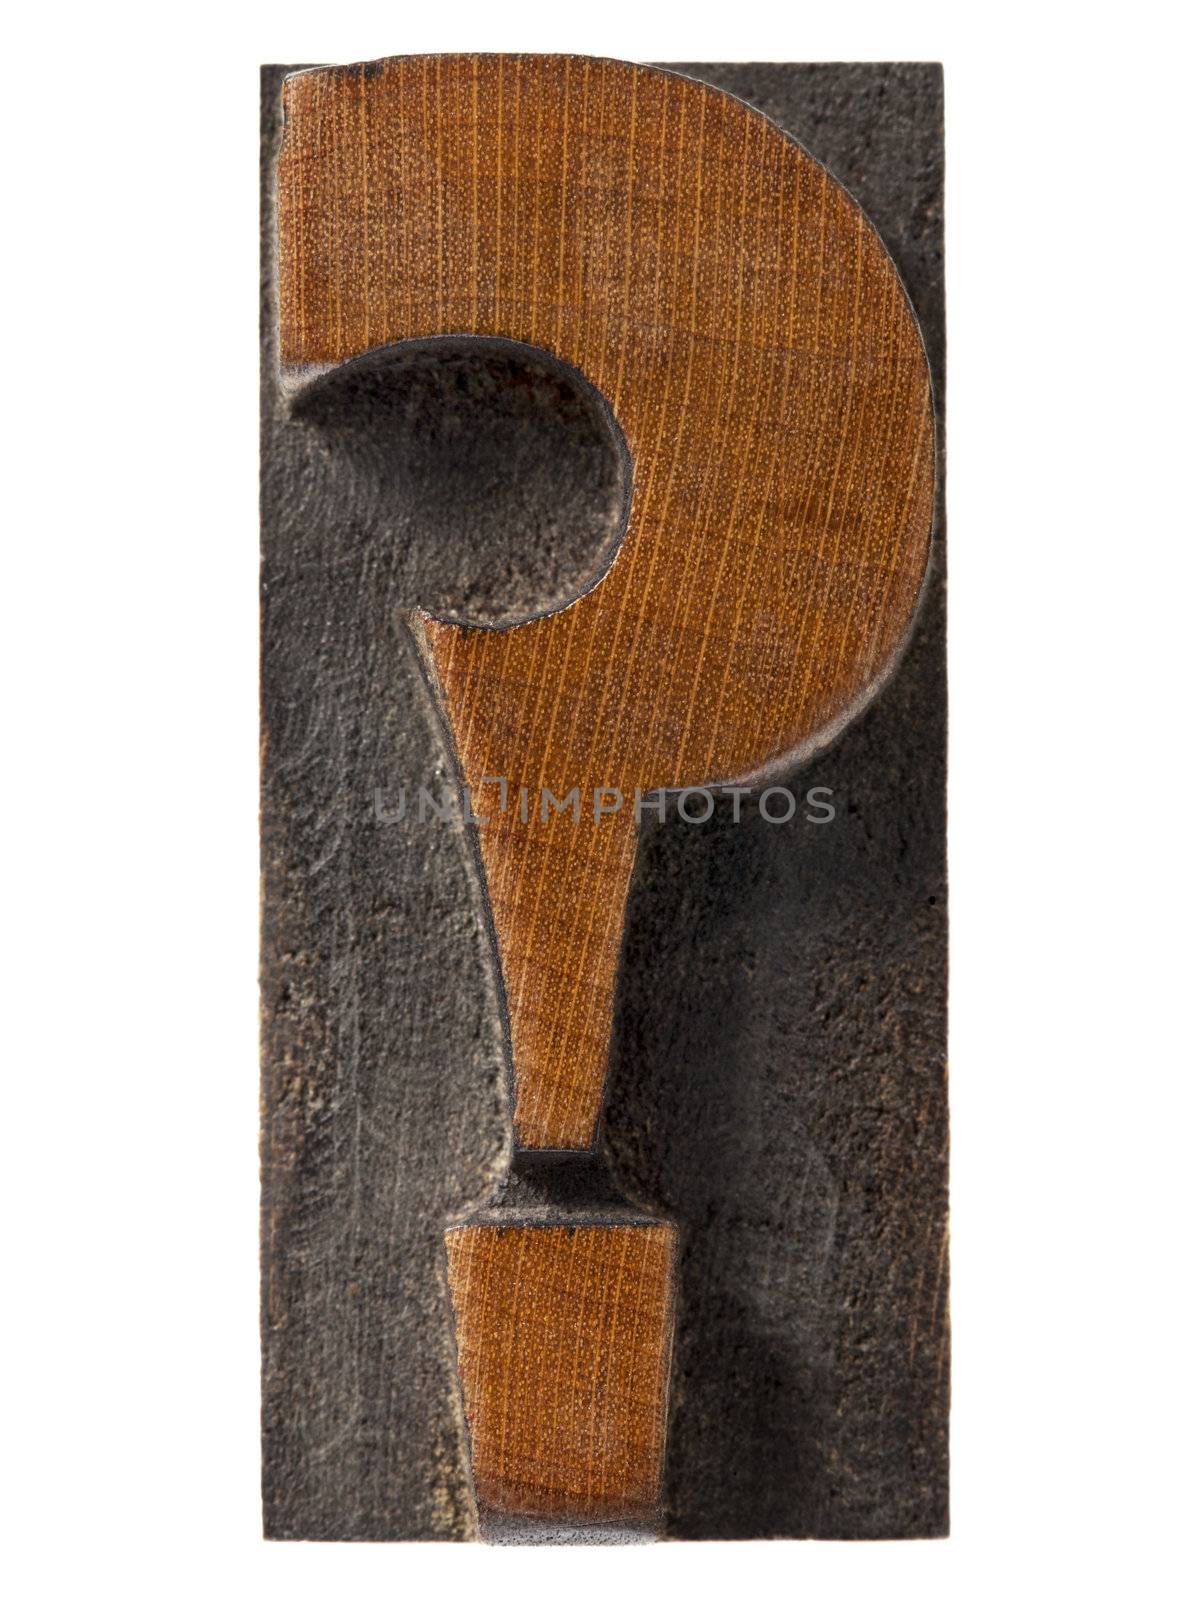 question mark - antique wood letterpress type block,  isolated on white